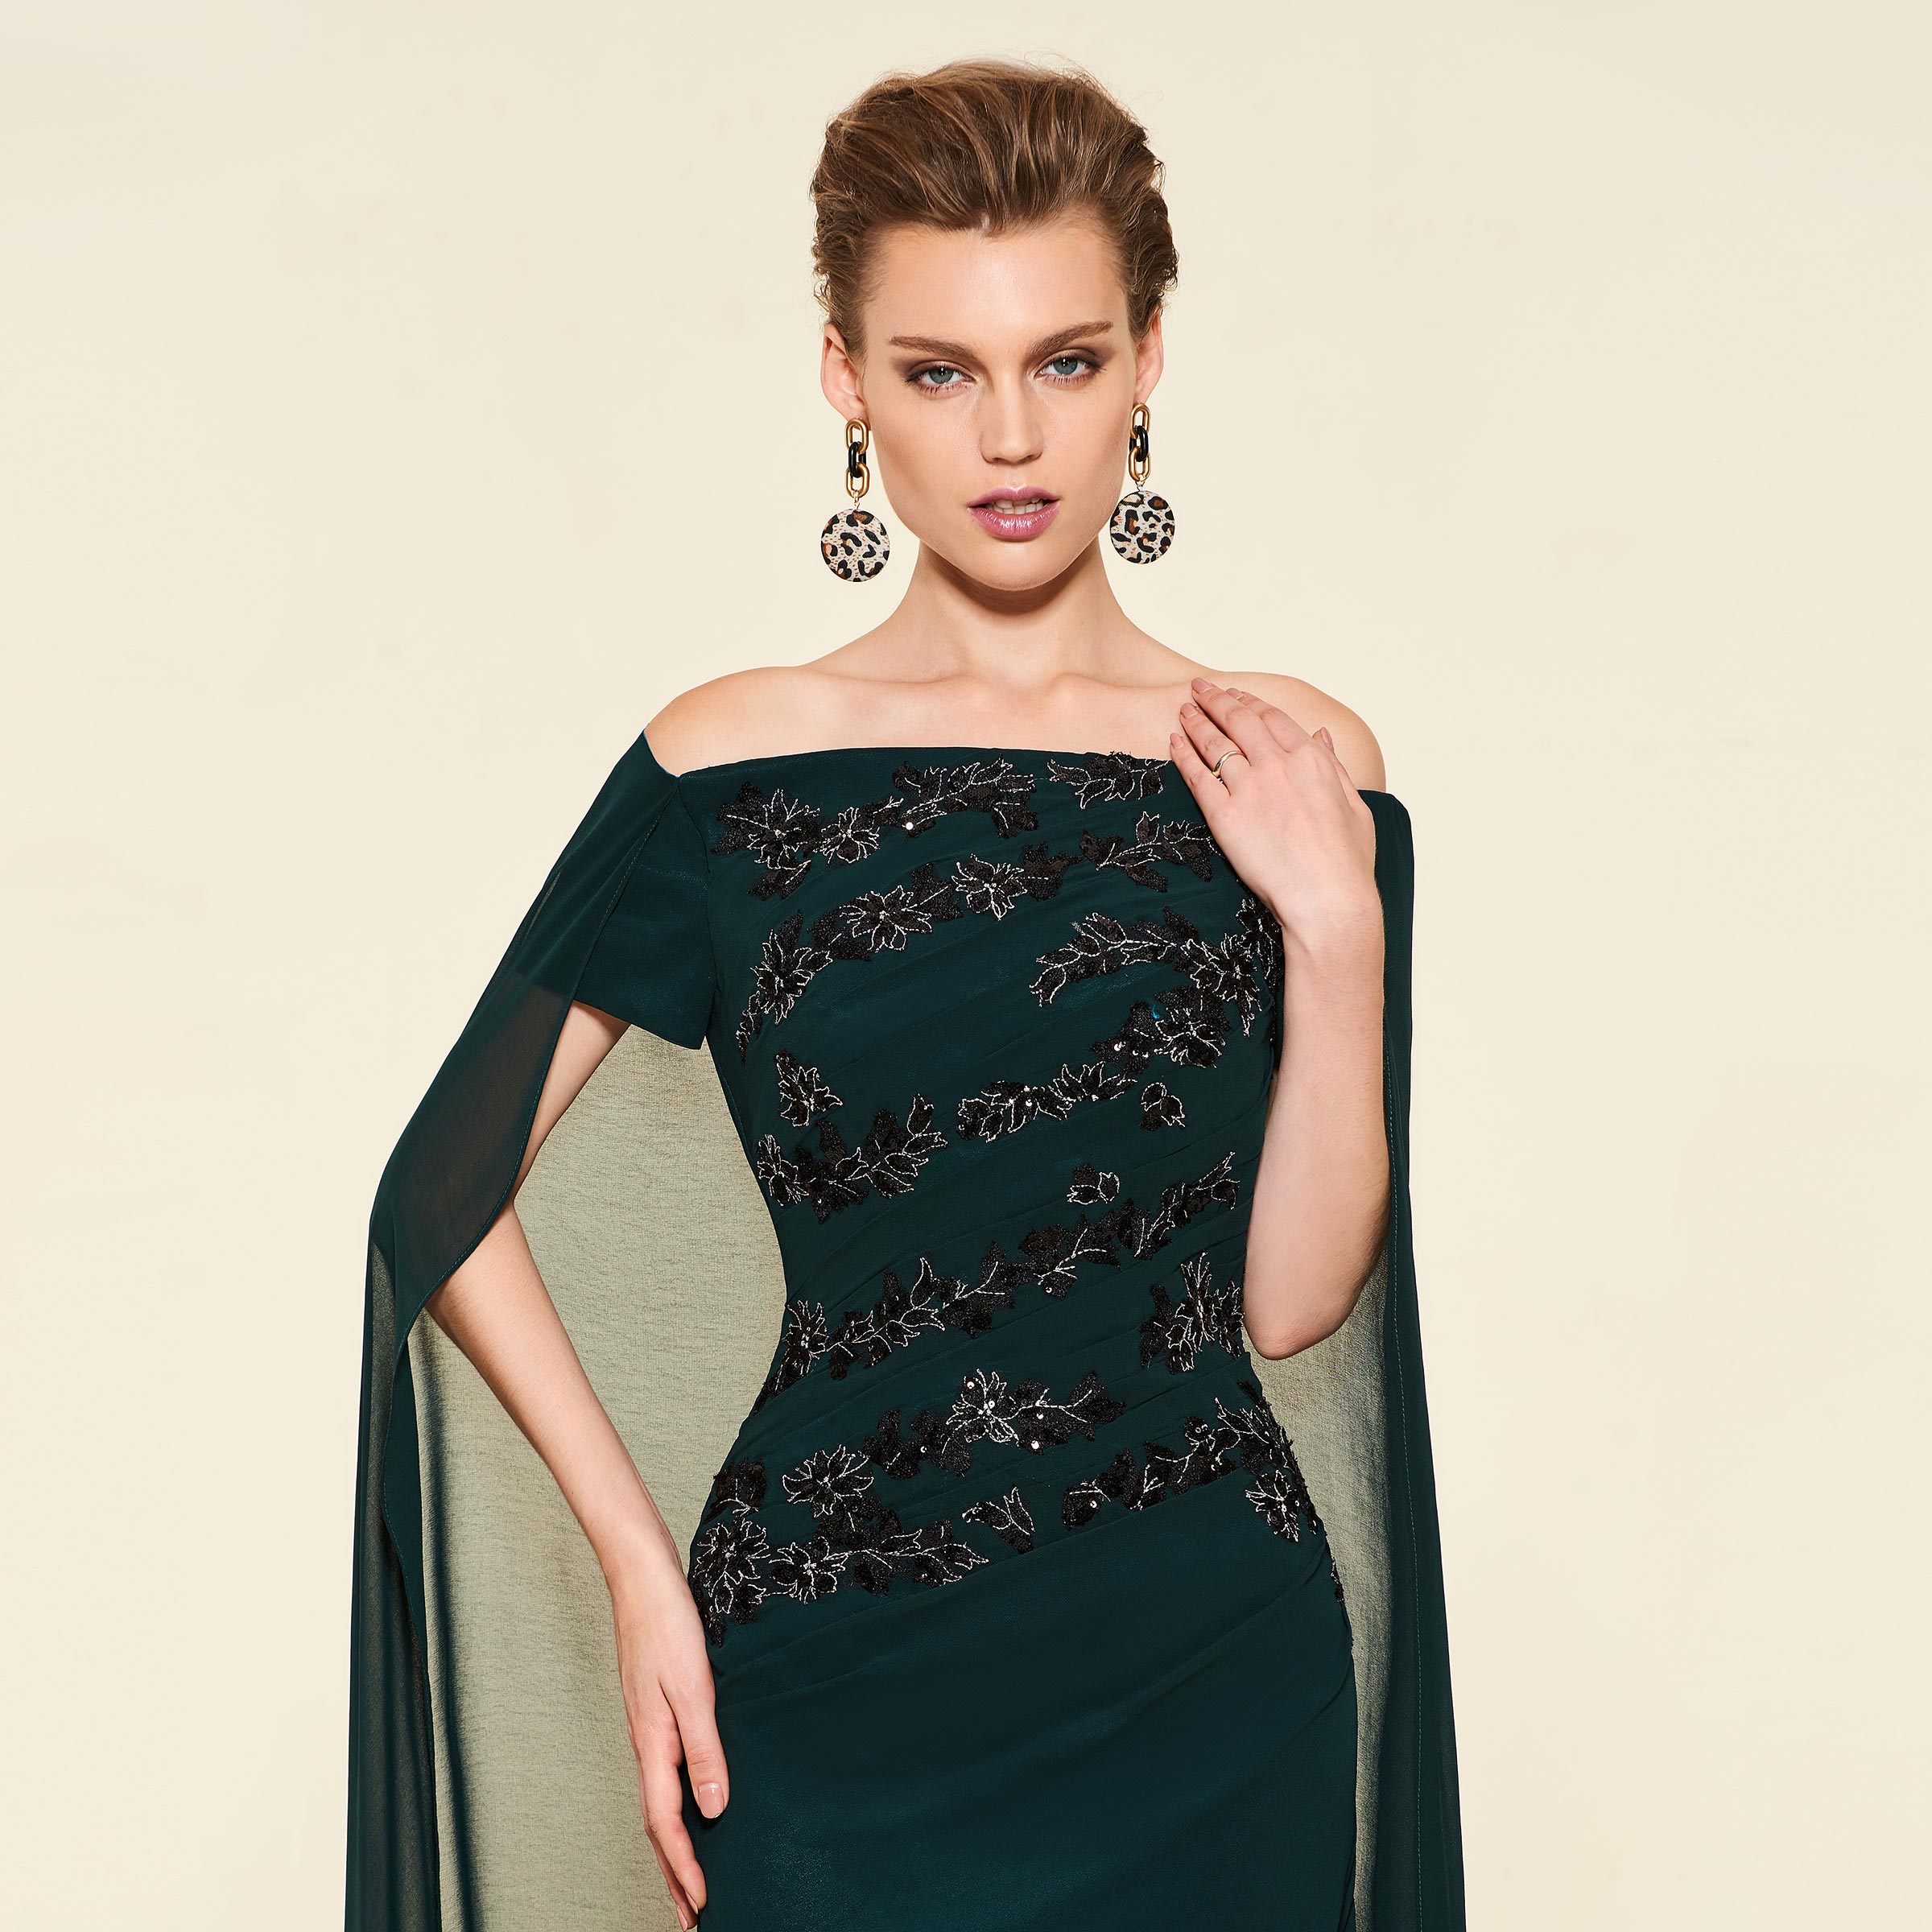 Ericdress Off-The-Shoulder Mermaid Mother of the Bride Dress